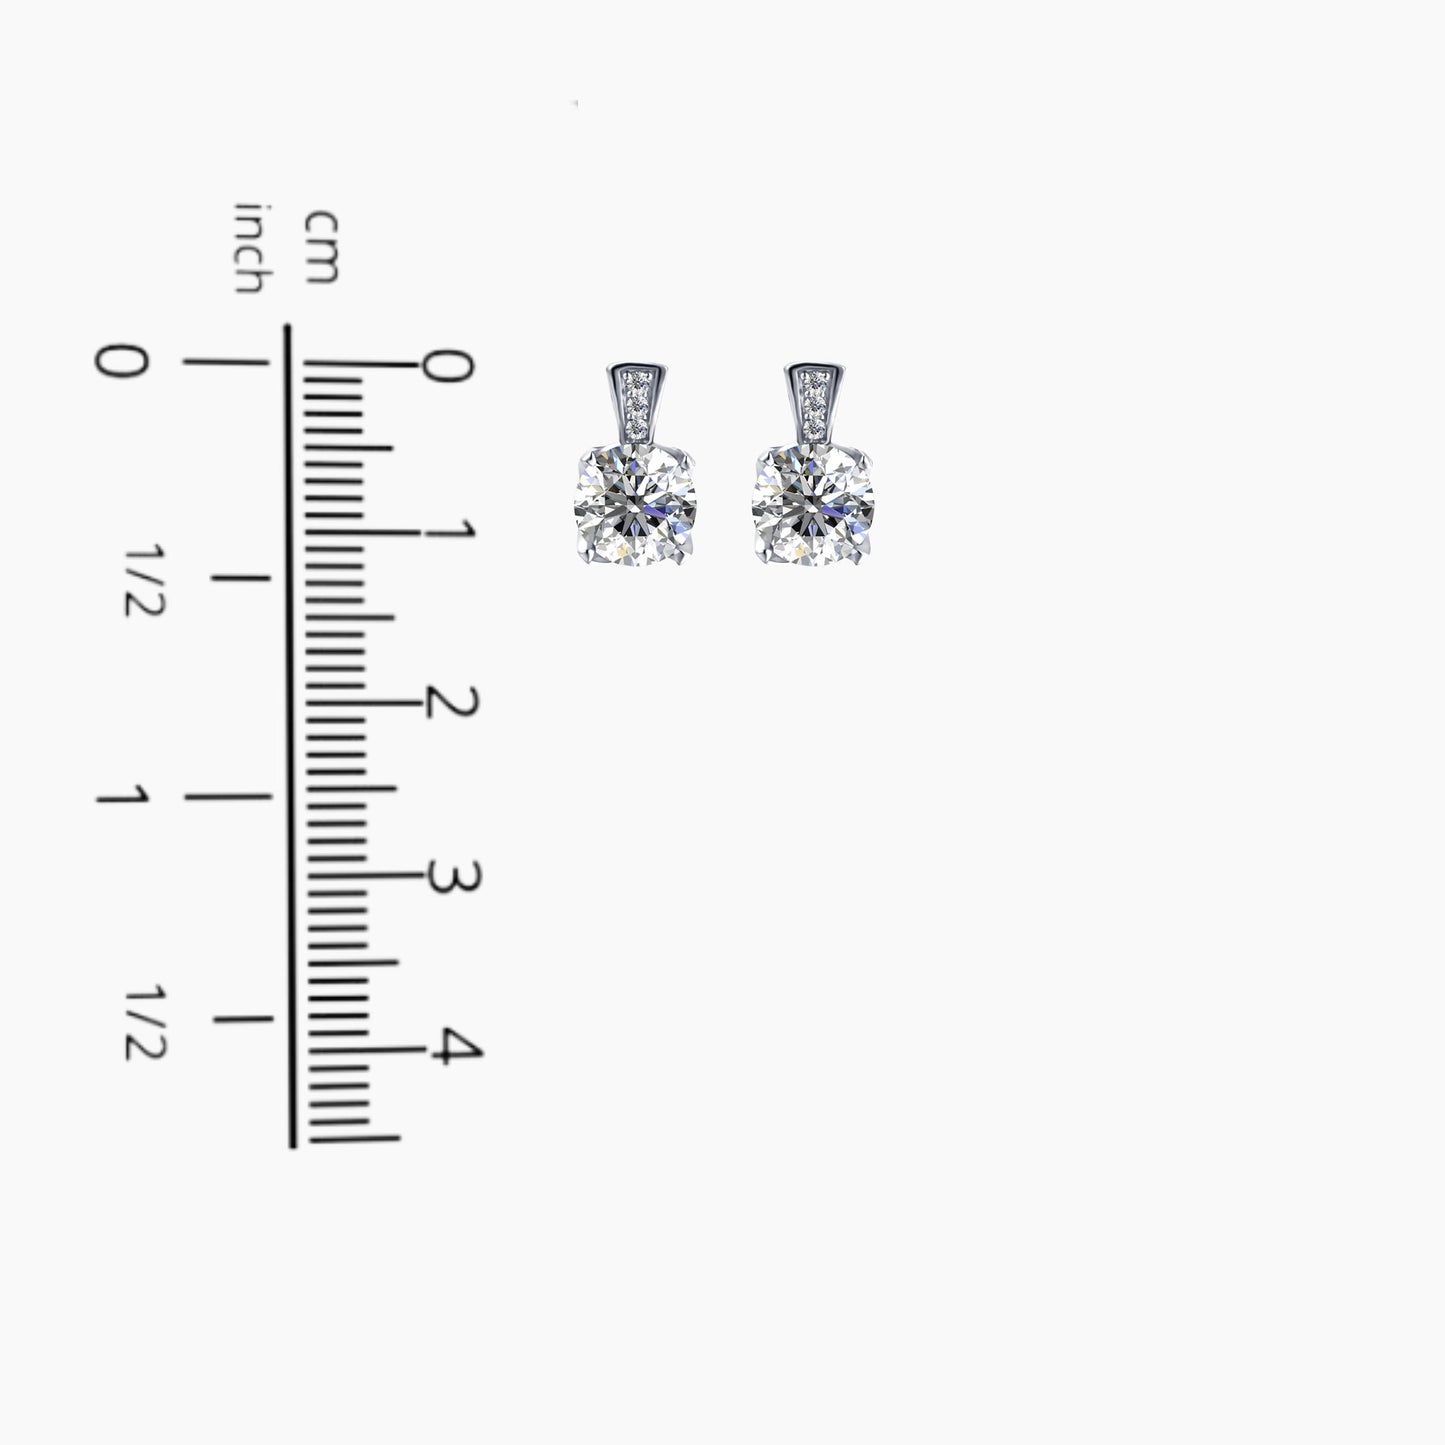 Moissanite 1ct. Scintillait Earrings in Sterling Silver